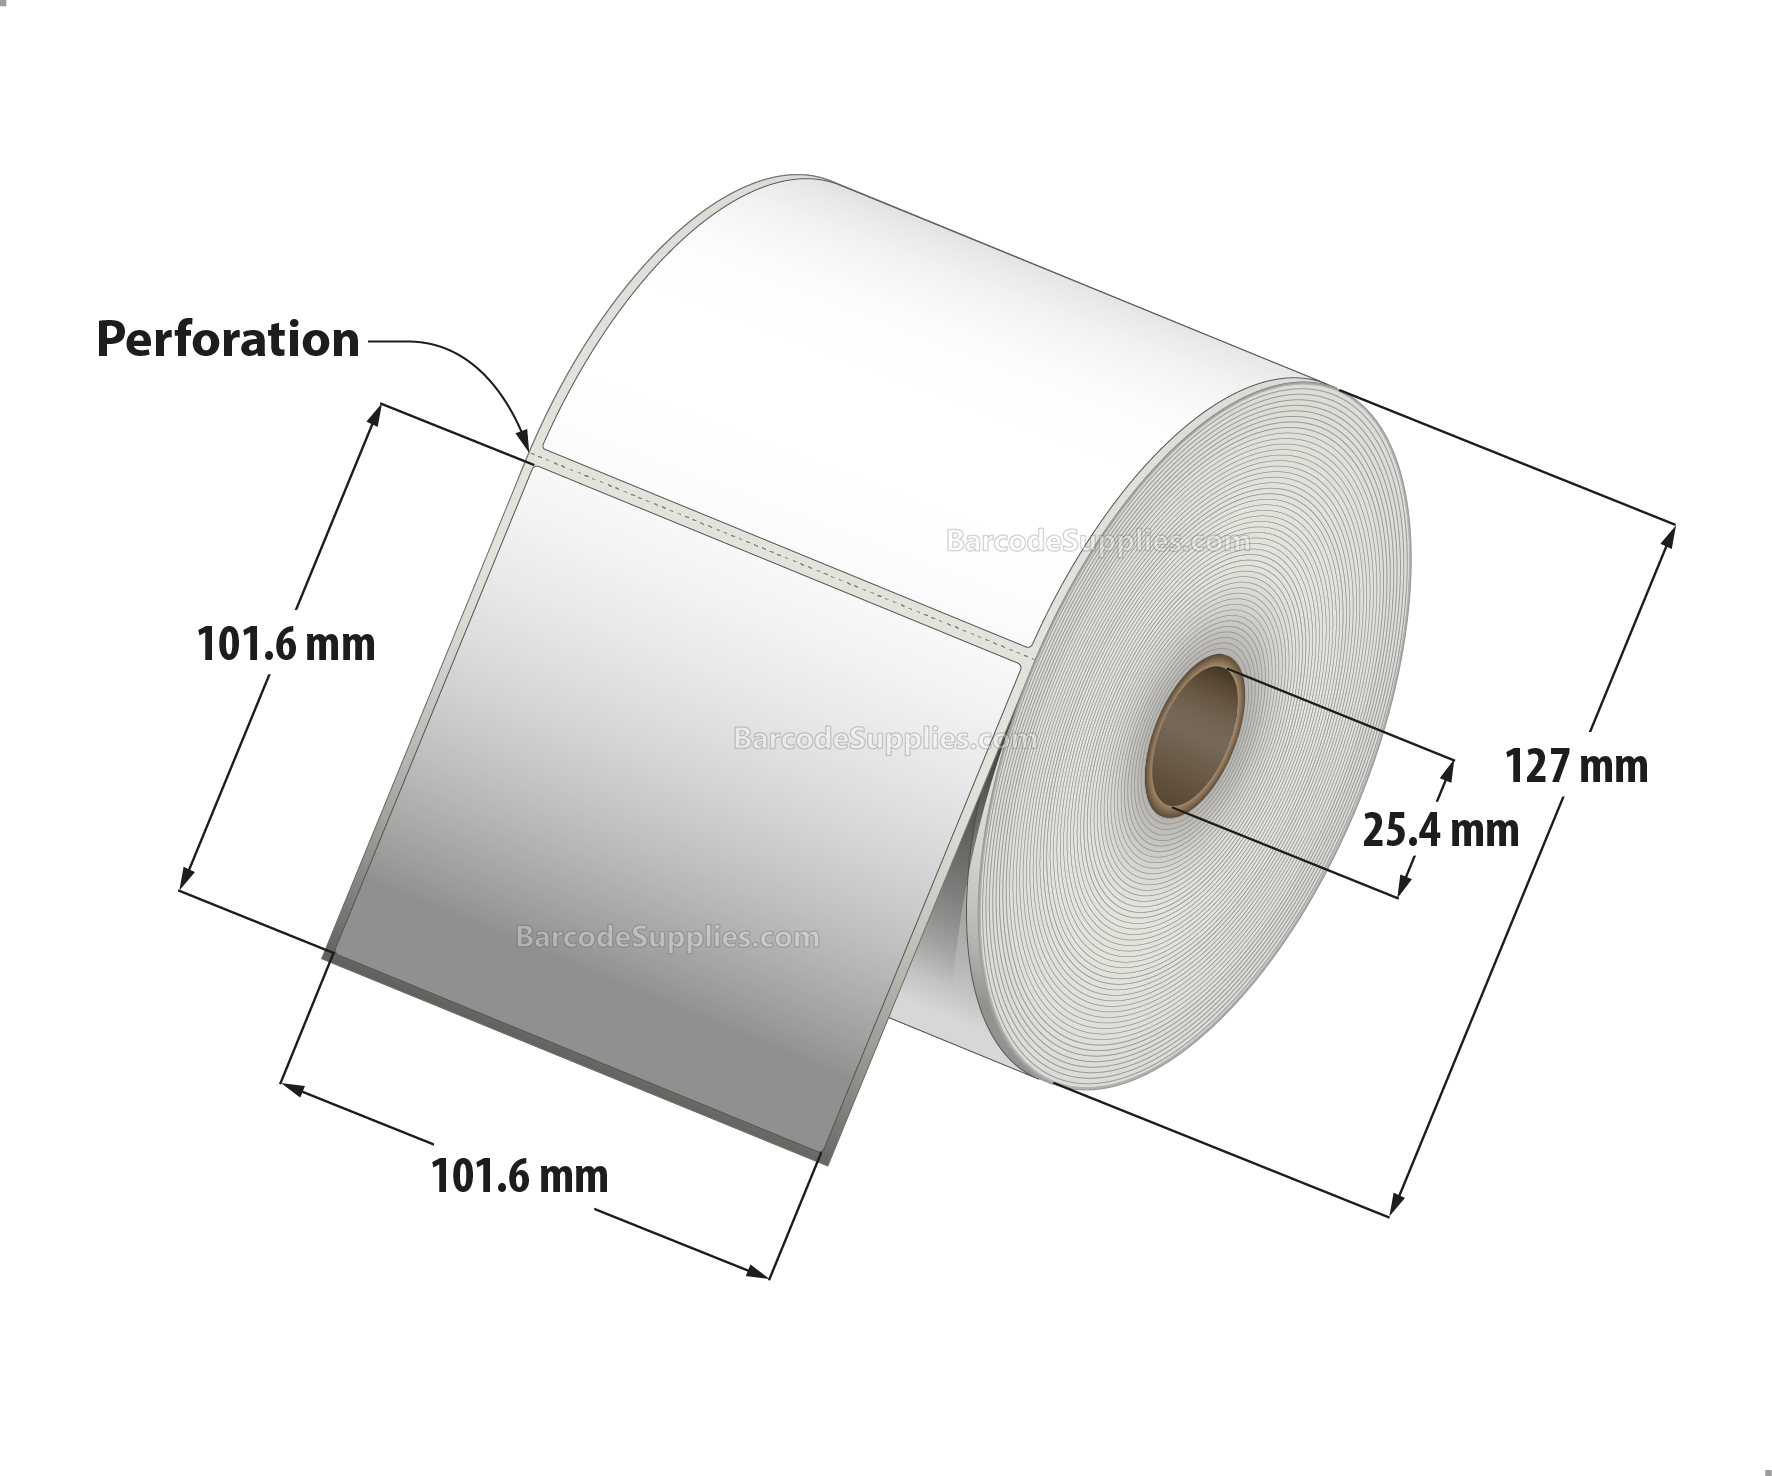 4 x 4 Thermal Transfer White Labels With Permanent Acrylic Adhesive - Perforated - 700 Labels Per Roll - Carton Of 4 Rolls - 2800 Labels Total - MPN: TH44-15PTT